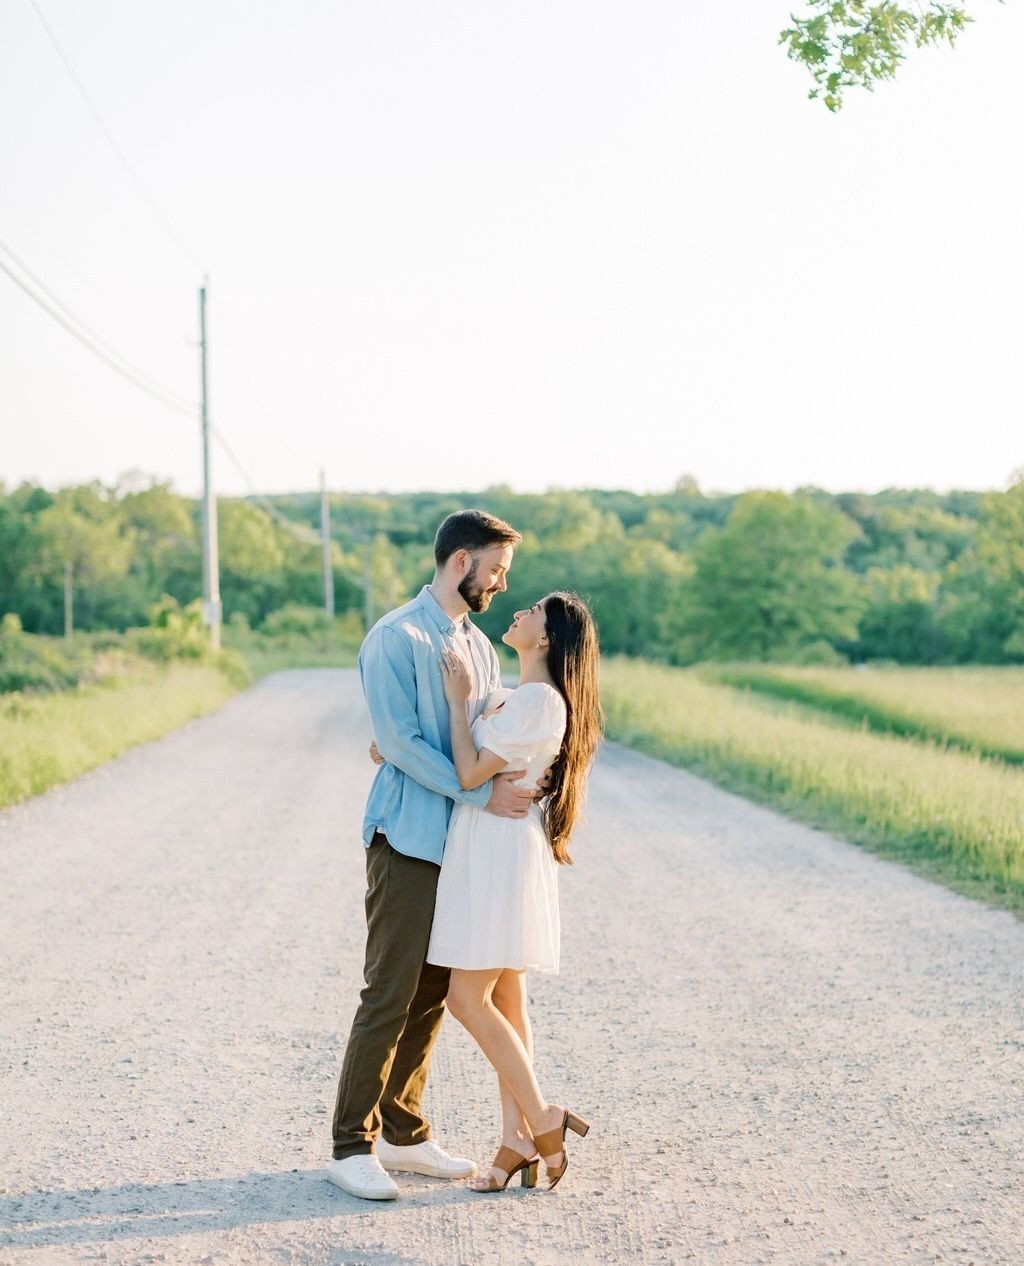 it's a full day of meetings and it's got me fired up for all the good things coming ☀️⁠
⁠
⁠
⁠
⁠
⁠
⁠
⁠
⁠
Connecticut engagement session | Connecticut wedding photographer | Connecticut engagement photographer | fine art wedding photographer | Connecti